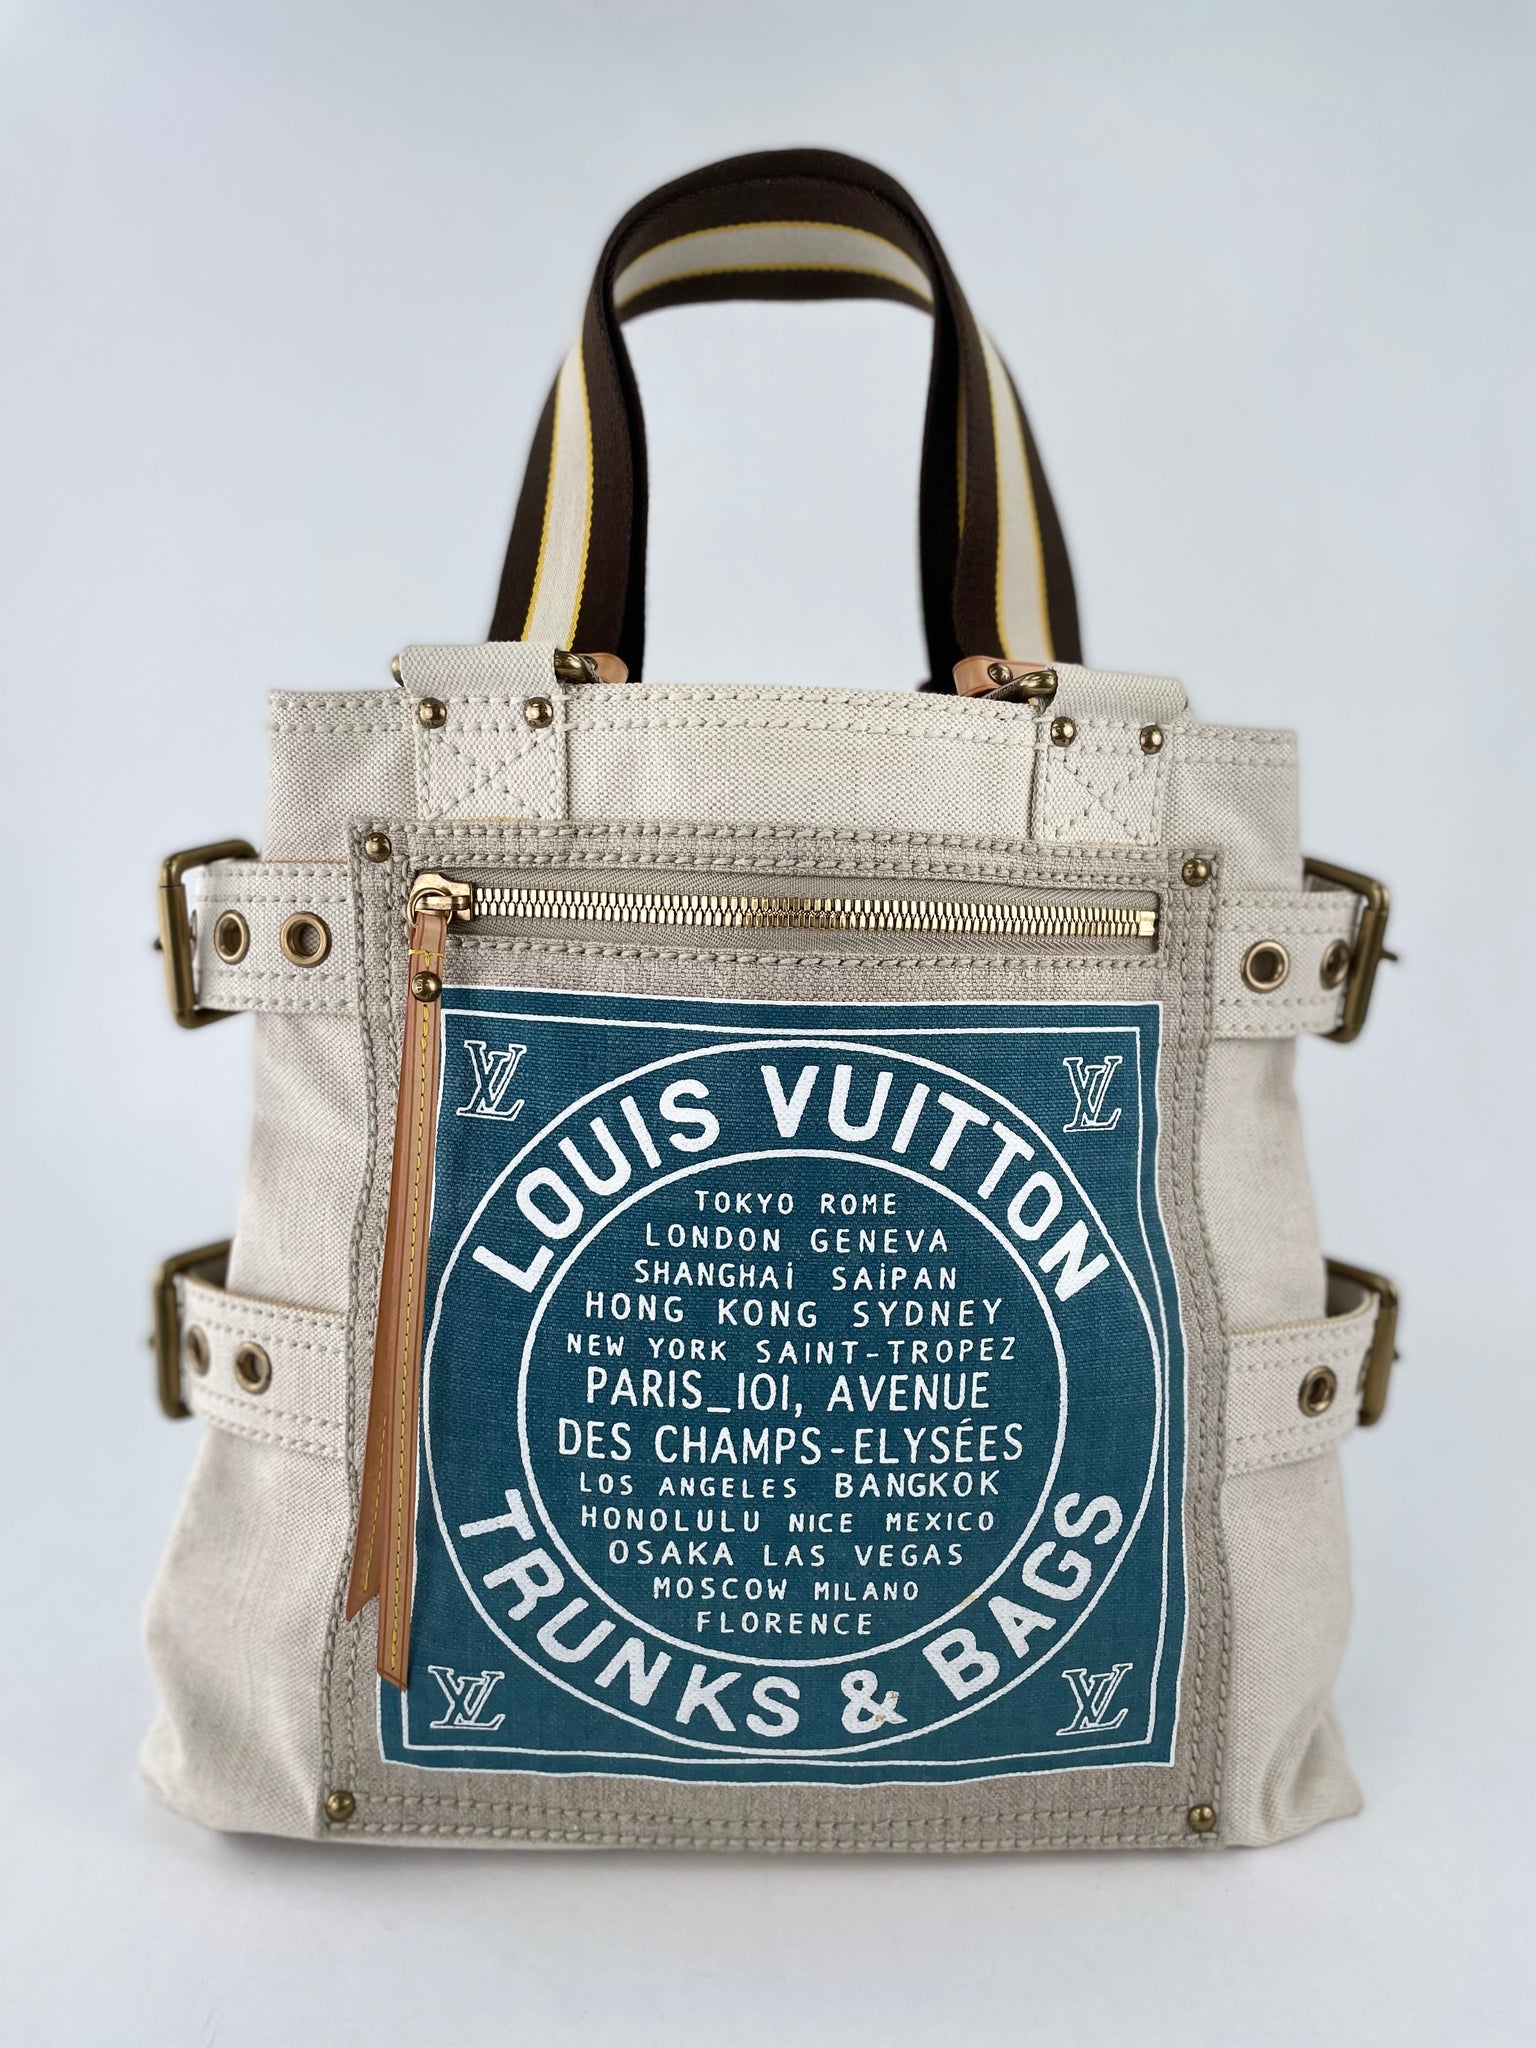 louis vuitton trunks and bags purse